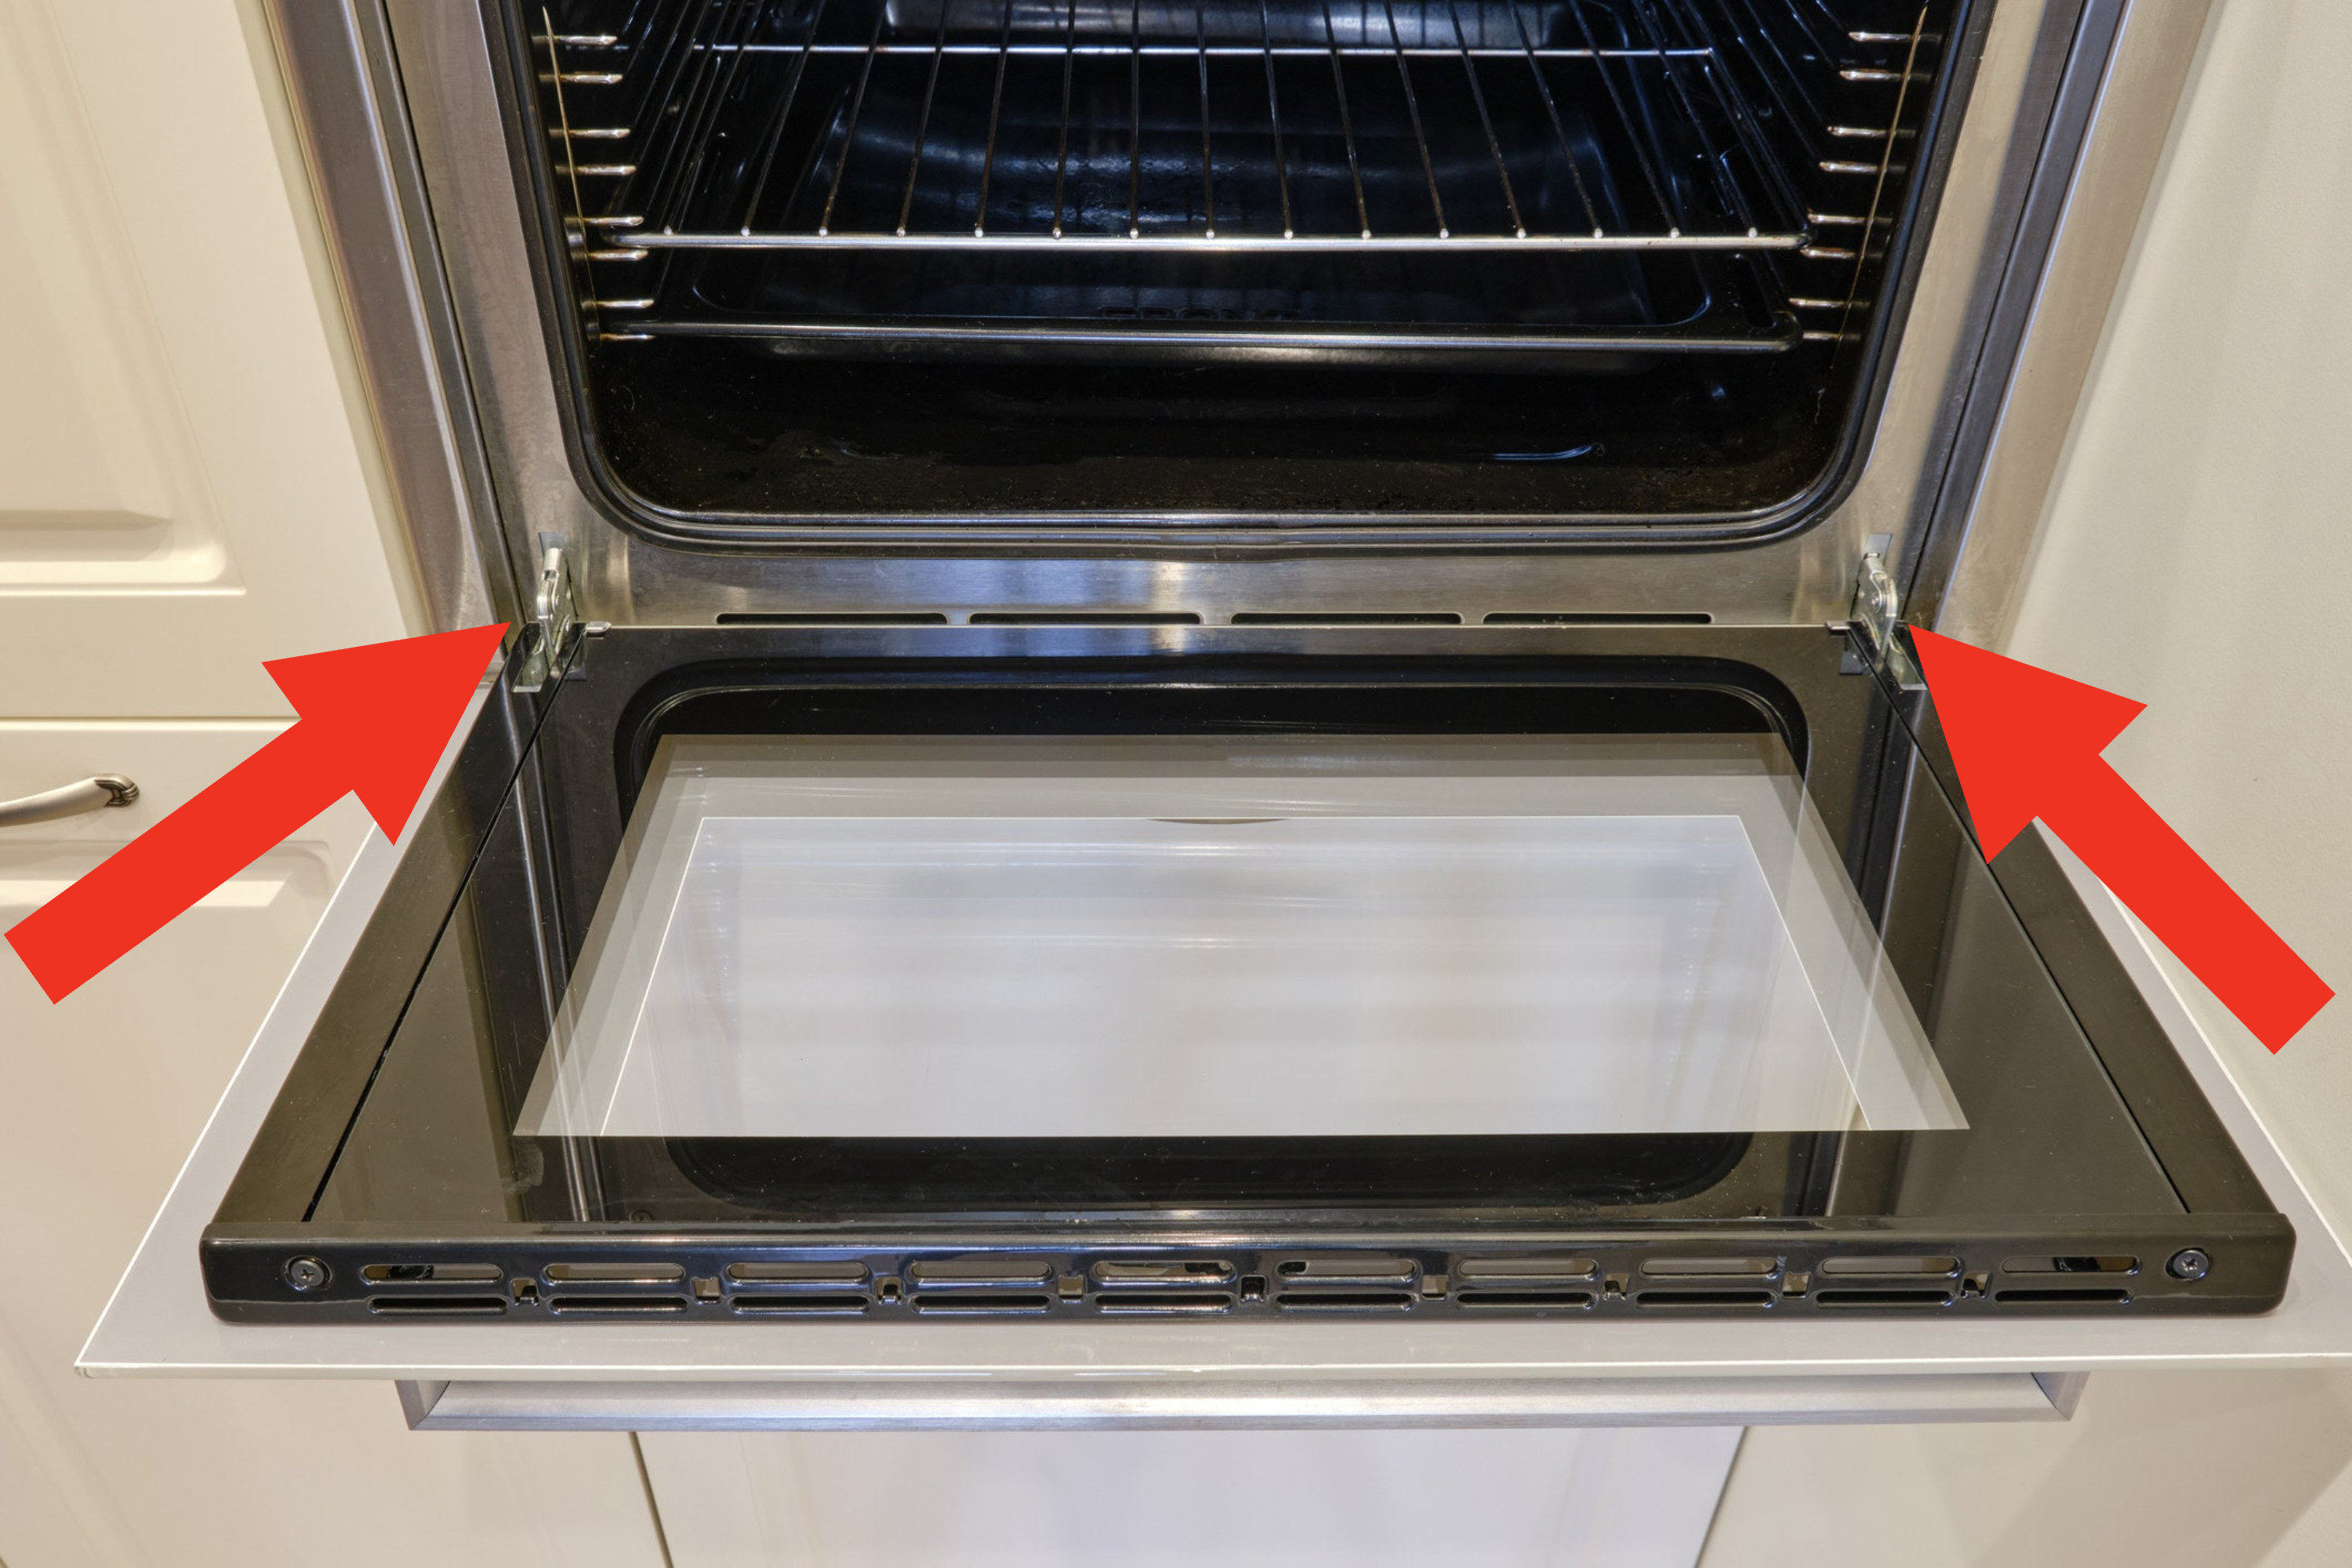 An opened oven with arrows pointing to the side of the oven door